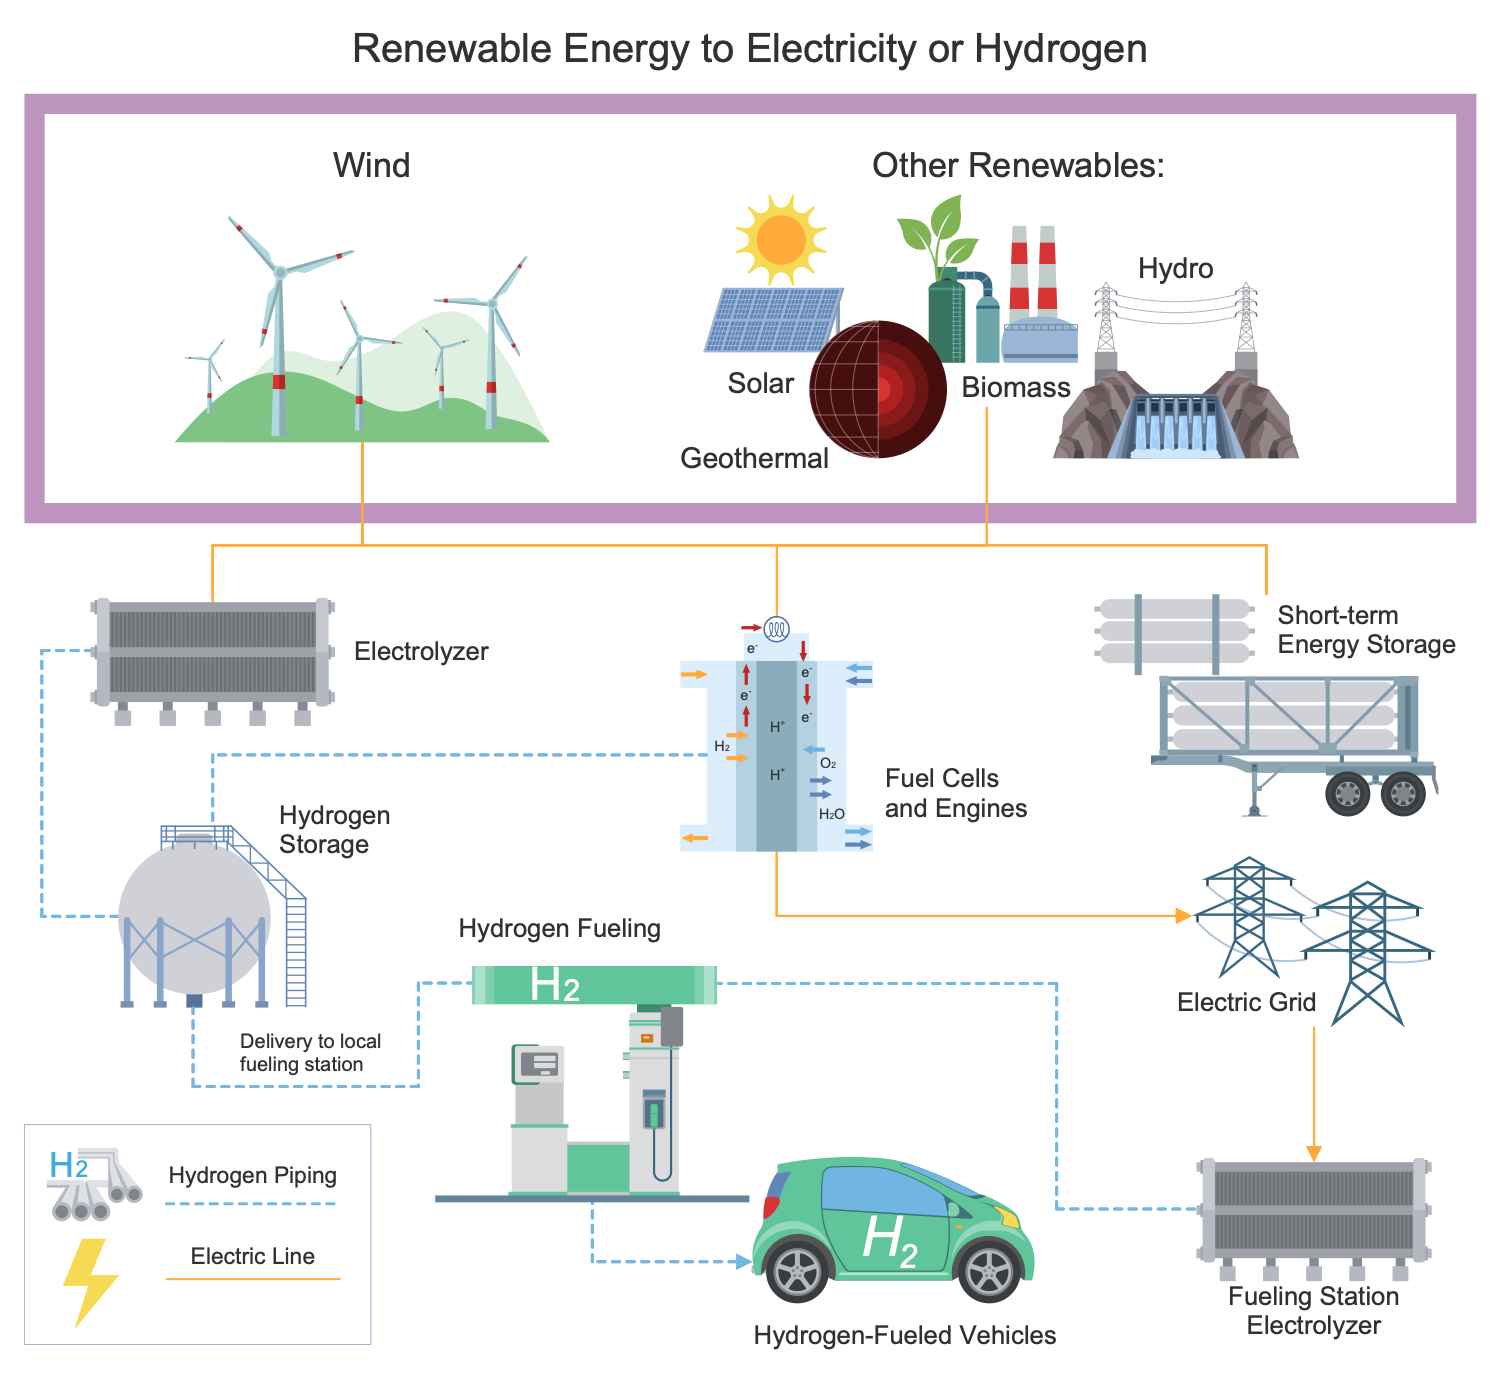 Renewable Energy to Electricity or Hydrogen